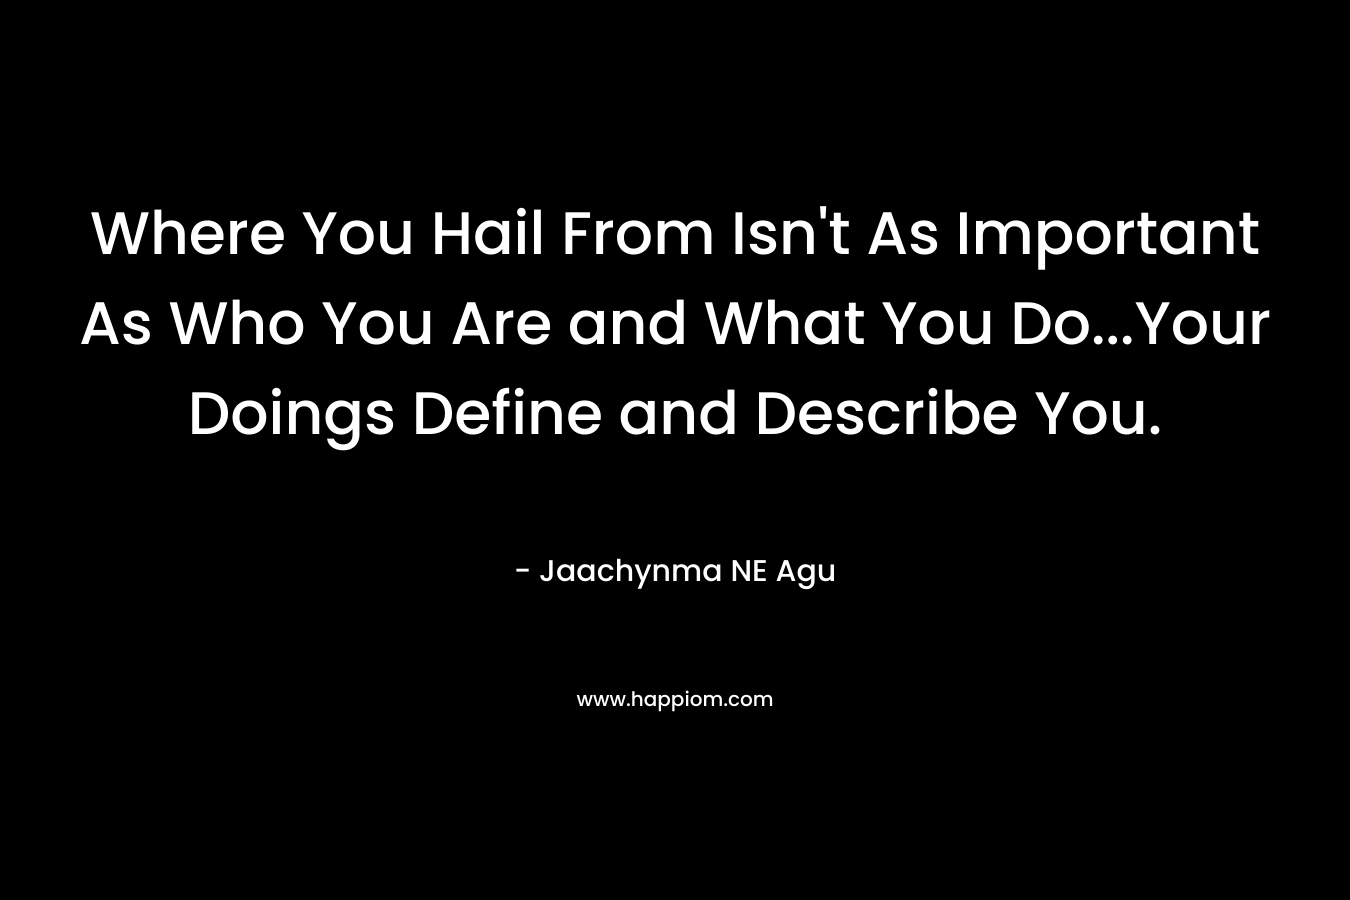 Where You Hail From Isn't As Important As Who You Are and What You Do...Your Doings Define and Describe You.